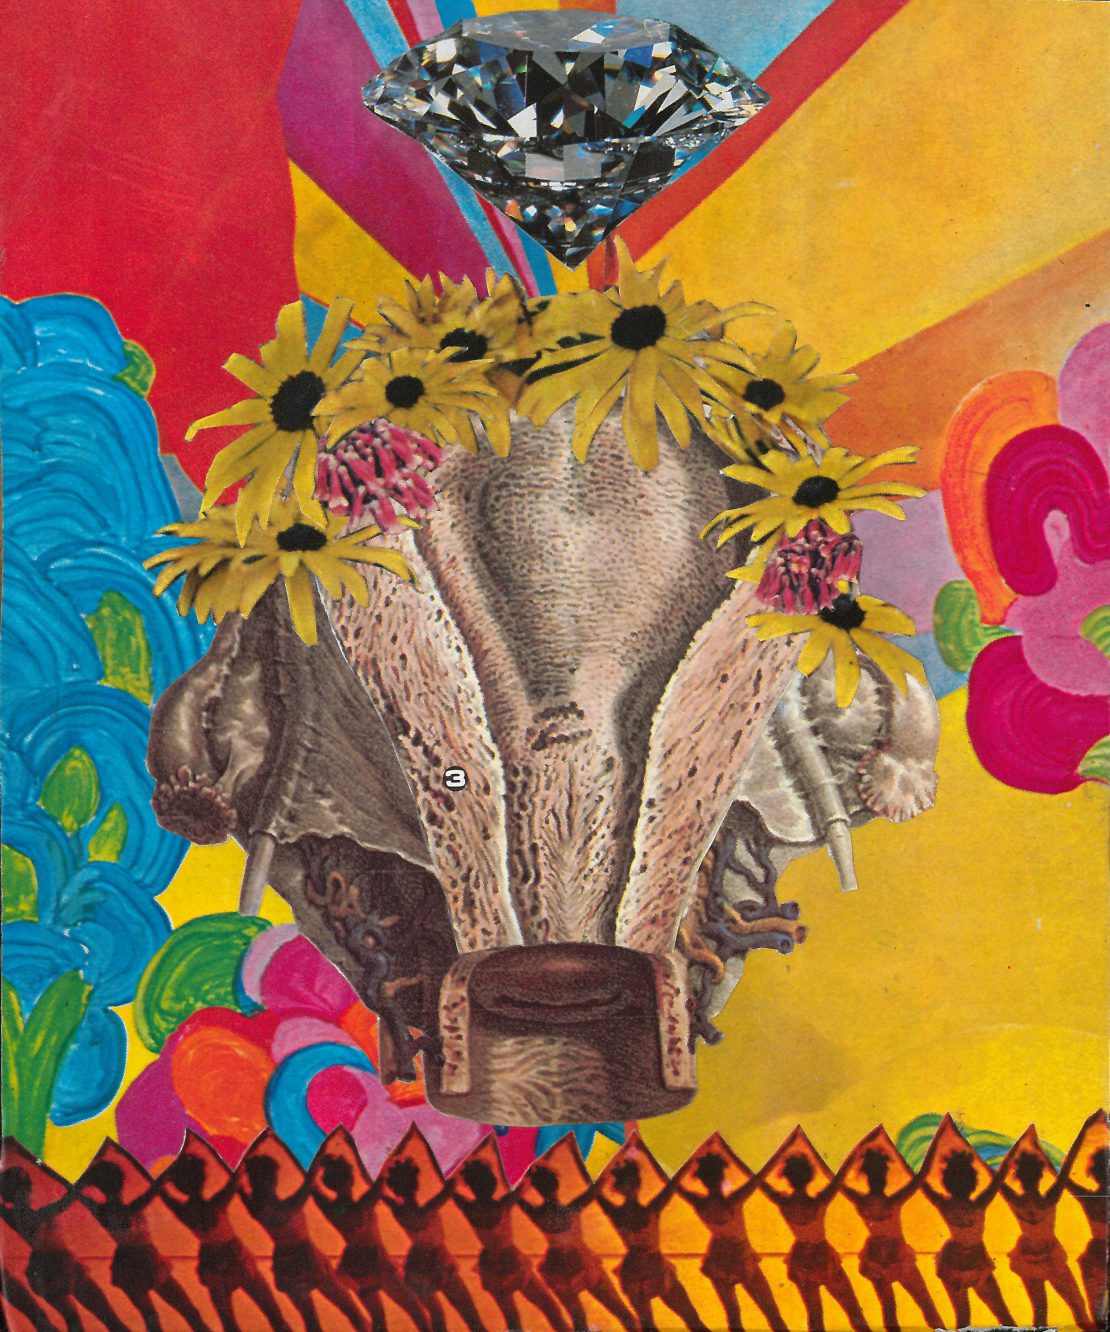 colorful collage artwork featuring flowers, a diamond, and female dancers